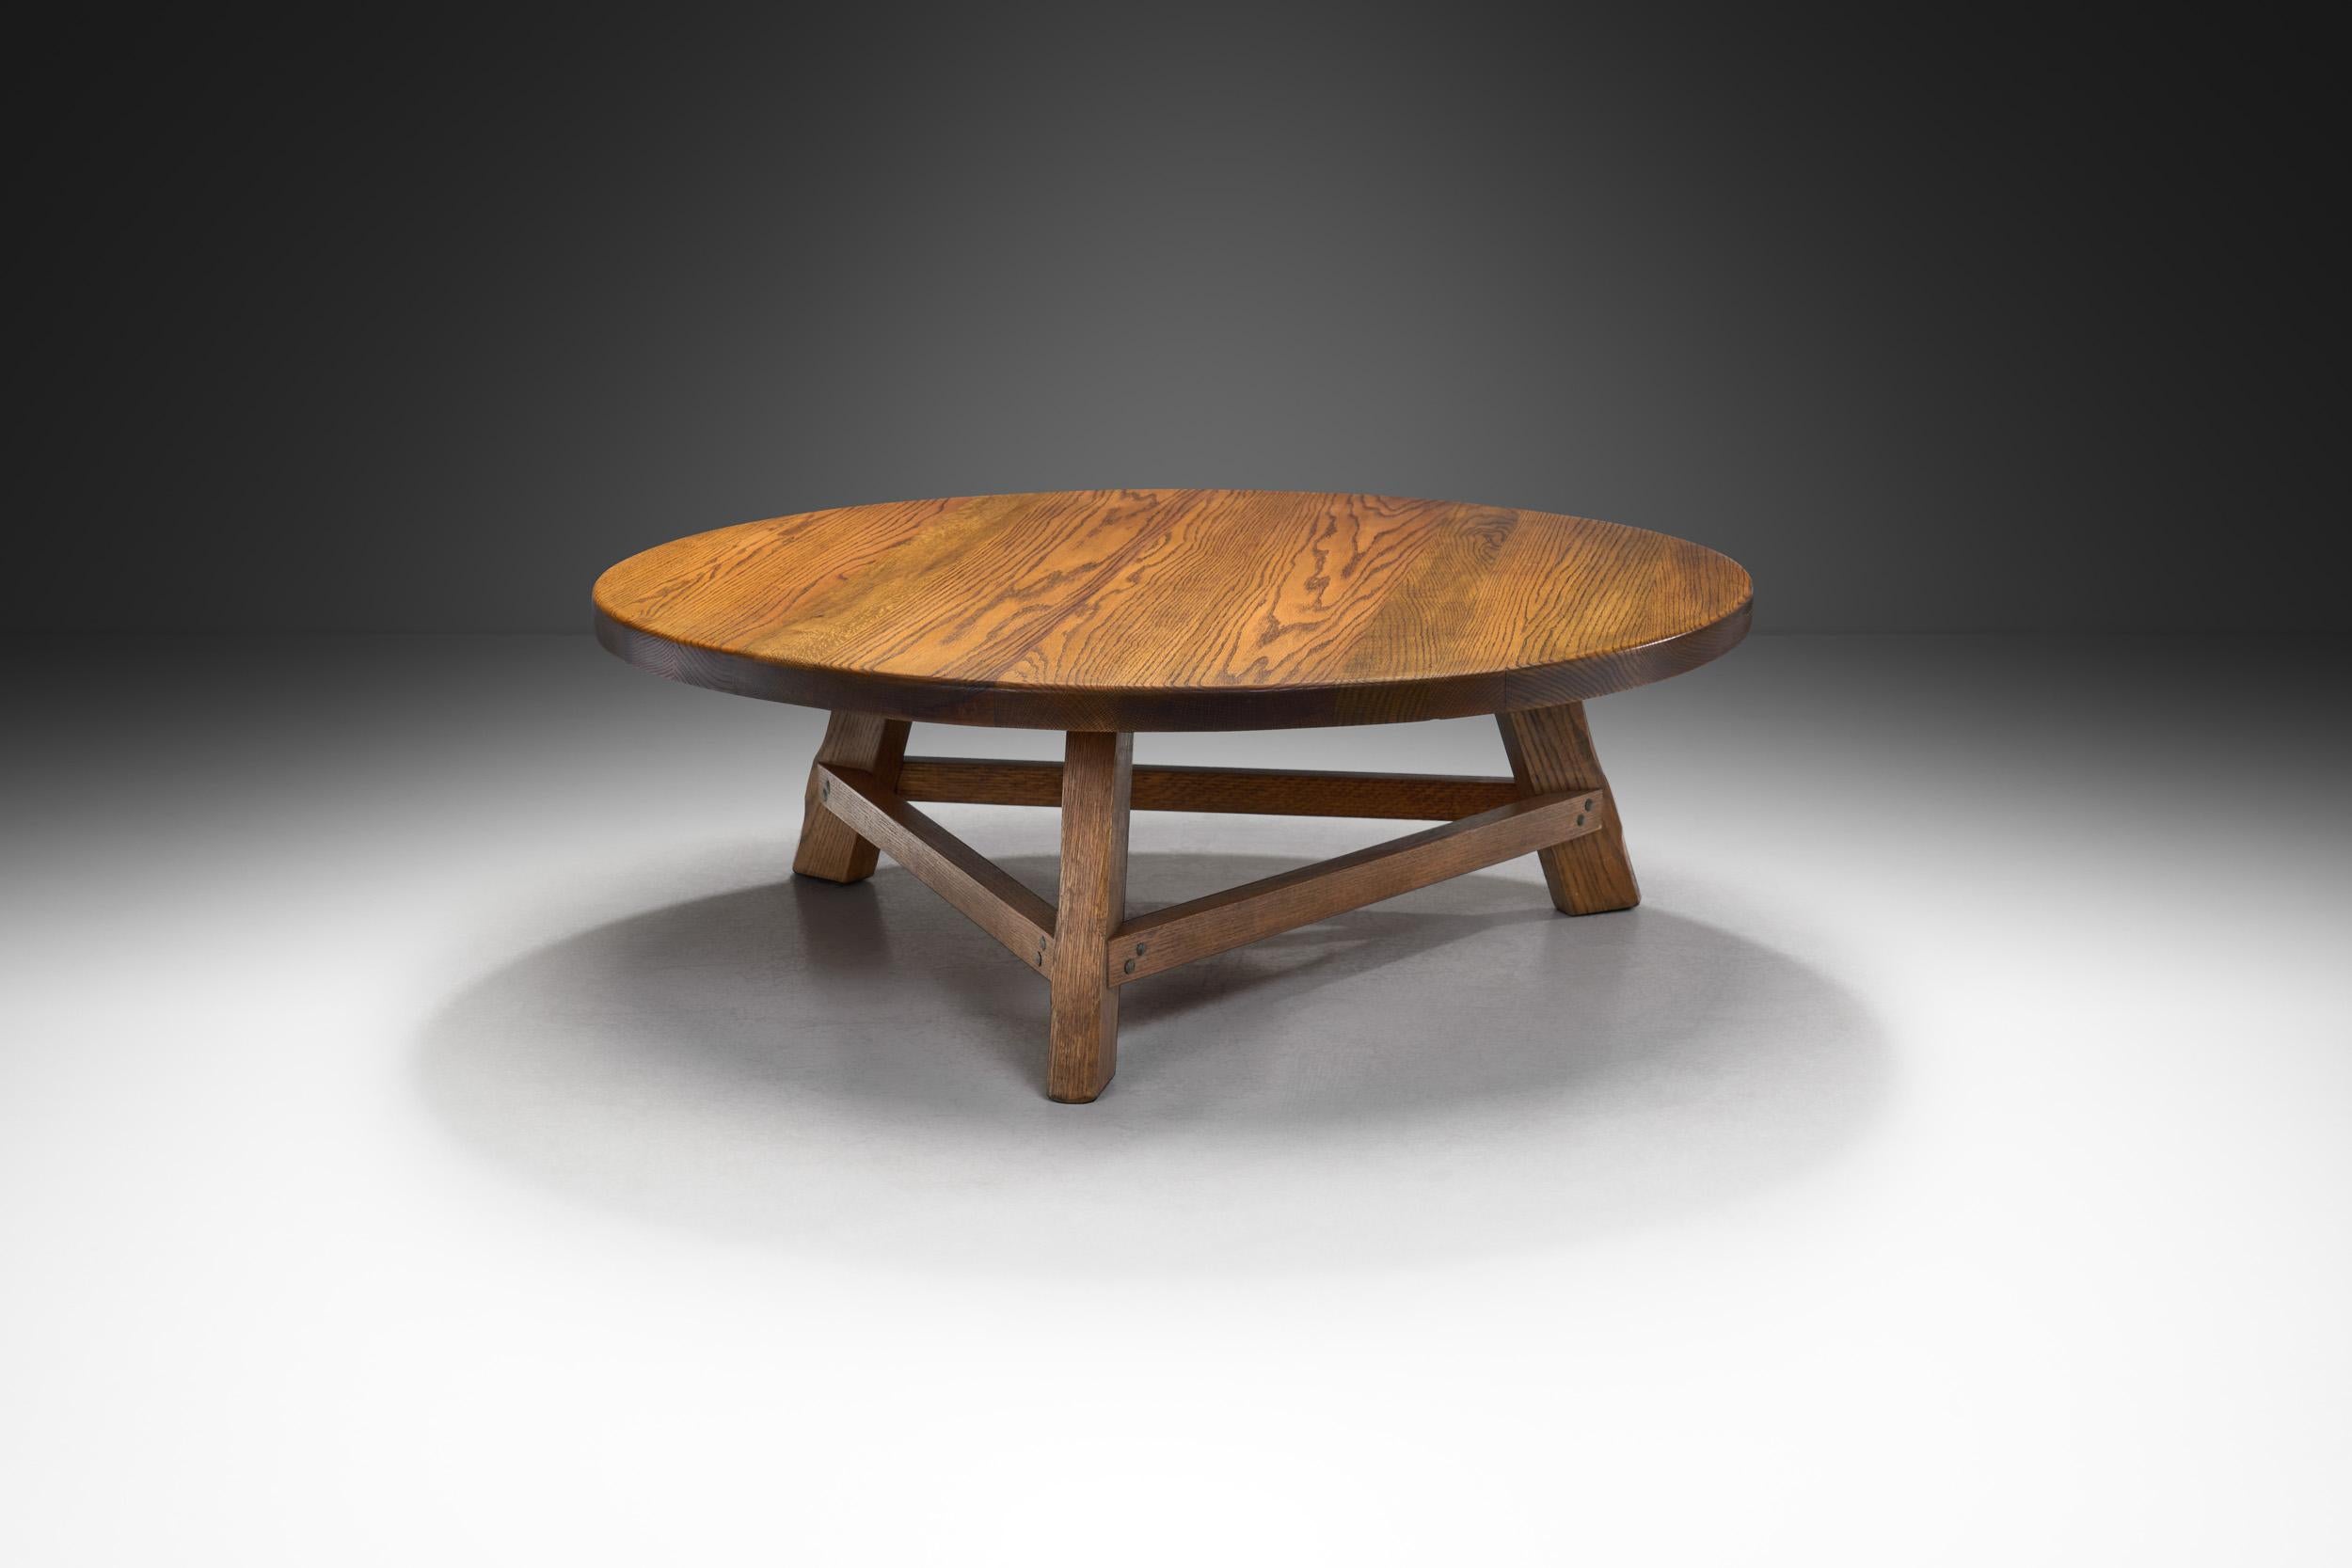 Crafted from a nice warm brown oak wood, this table in many ways epitomizes the Brutalist movement, a design philosophy rooted in raw, unadorned materials and a functionalist ethos.

This piece has a startling rawness, but with its warm-toned, hand